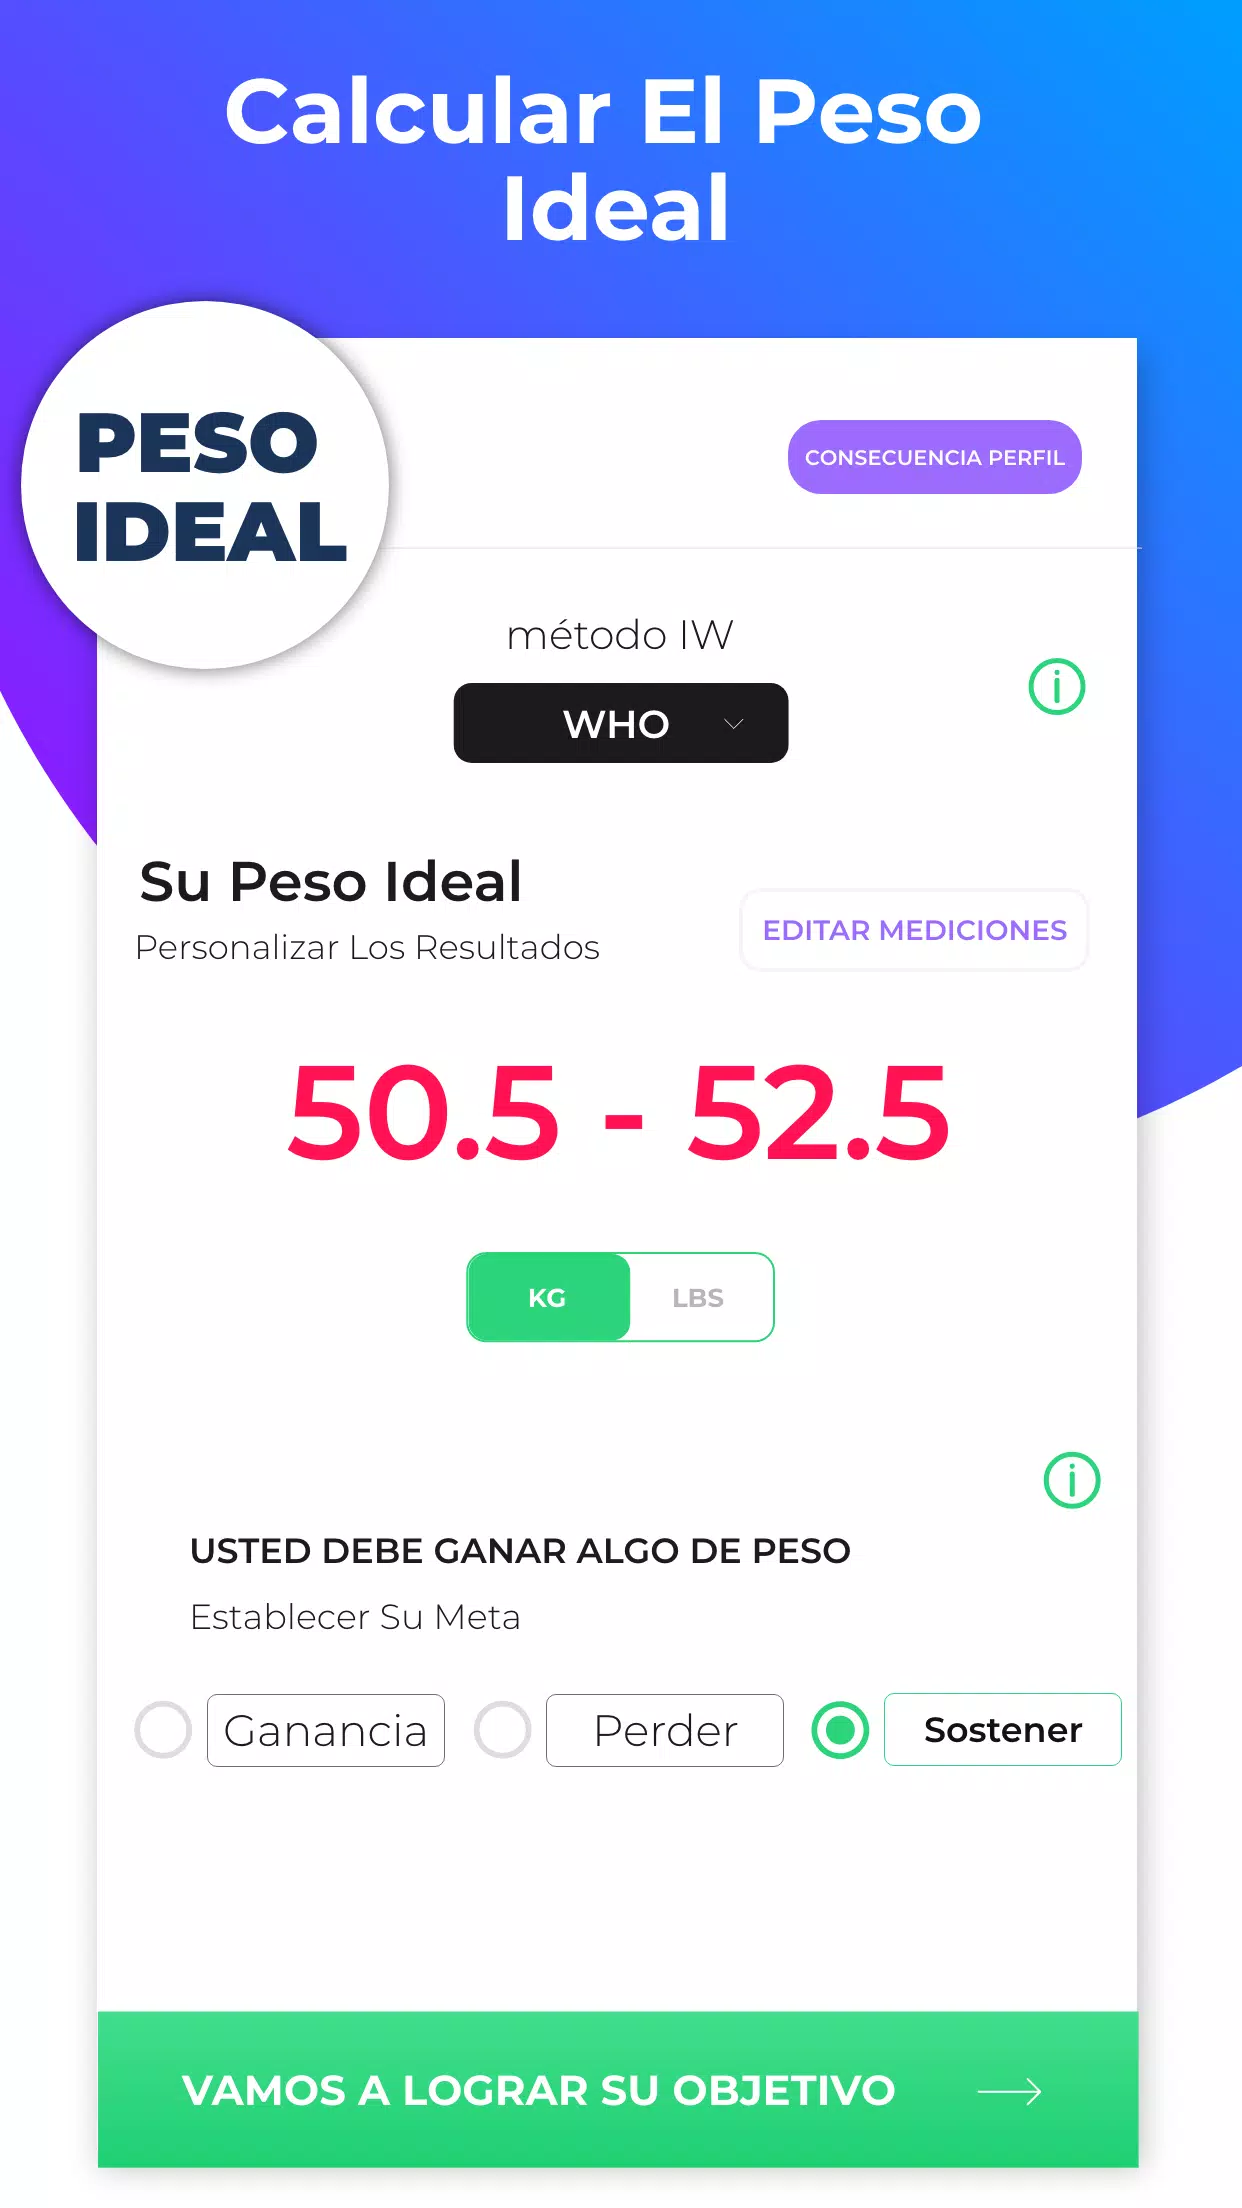 IMC Calculadora - peso ideal for Android - APK Download